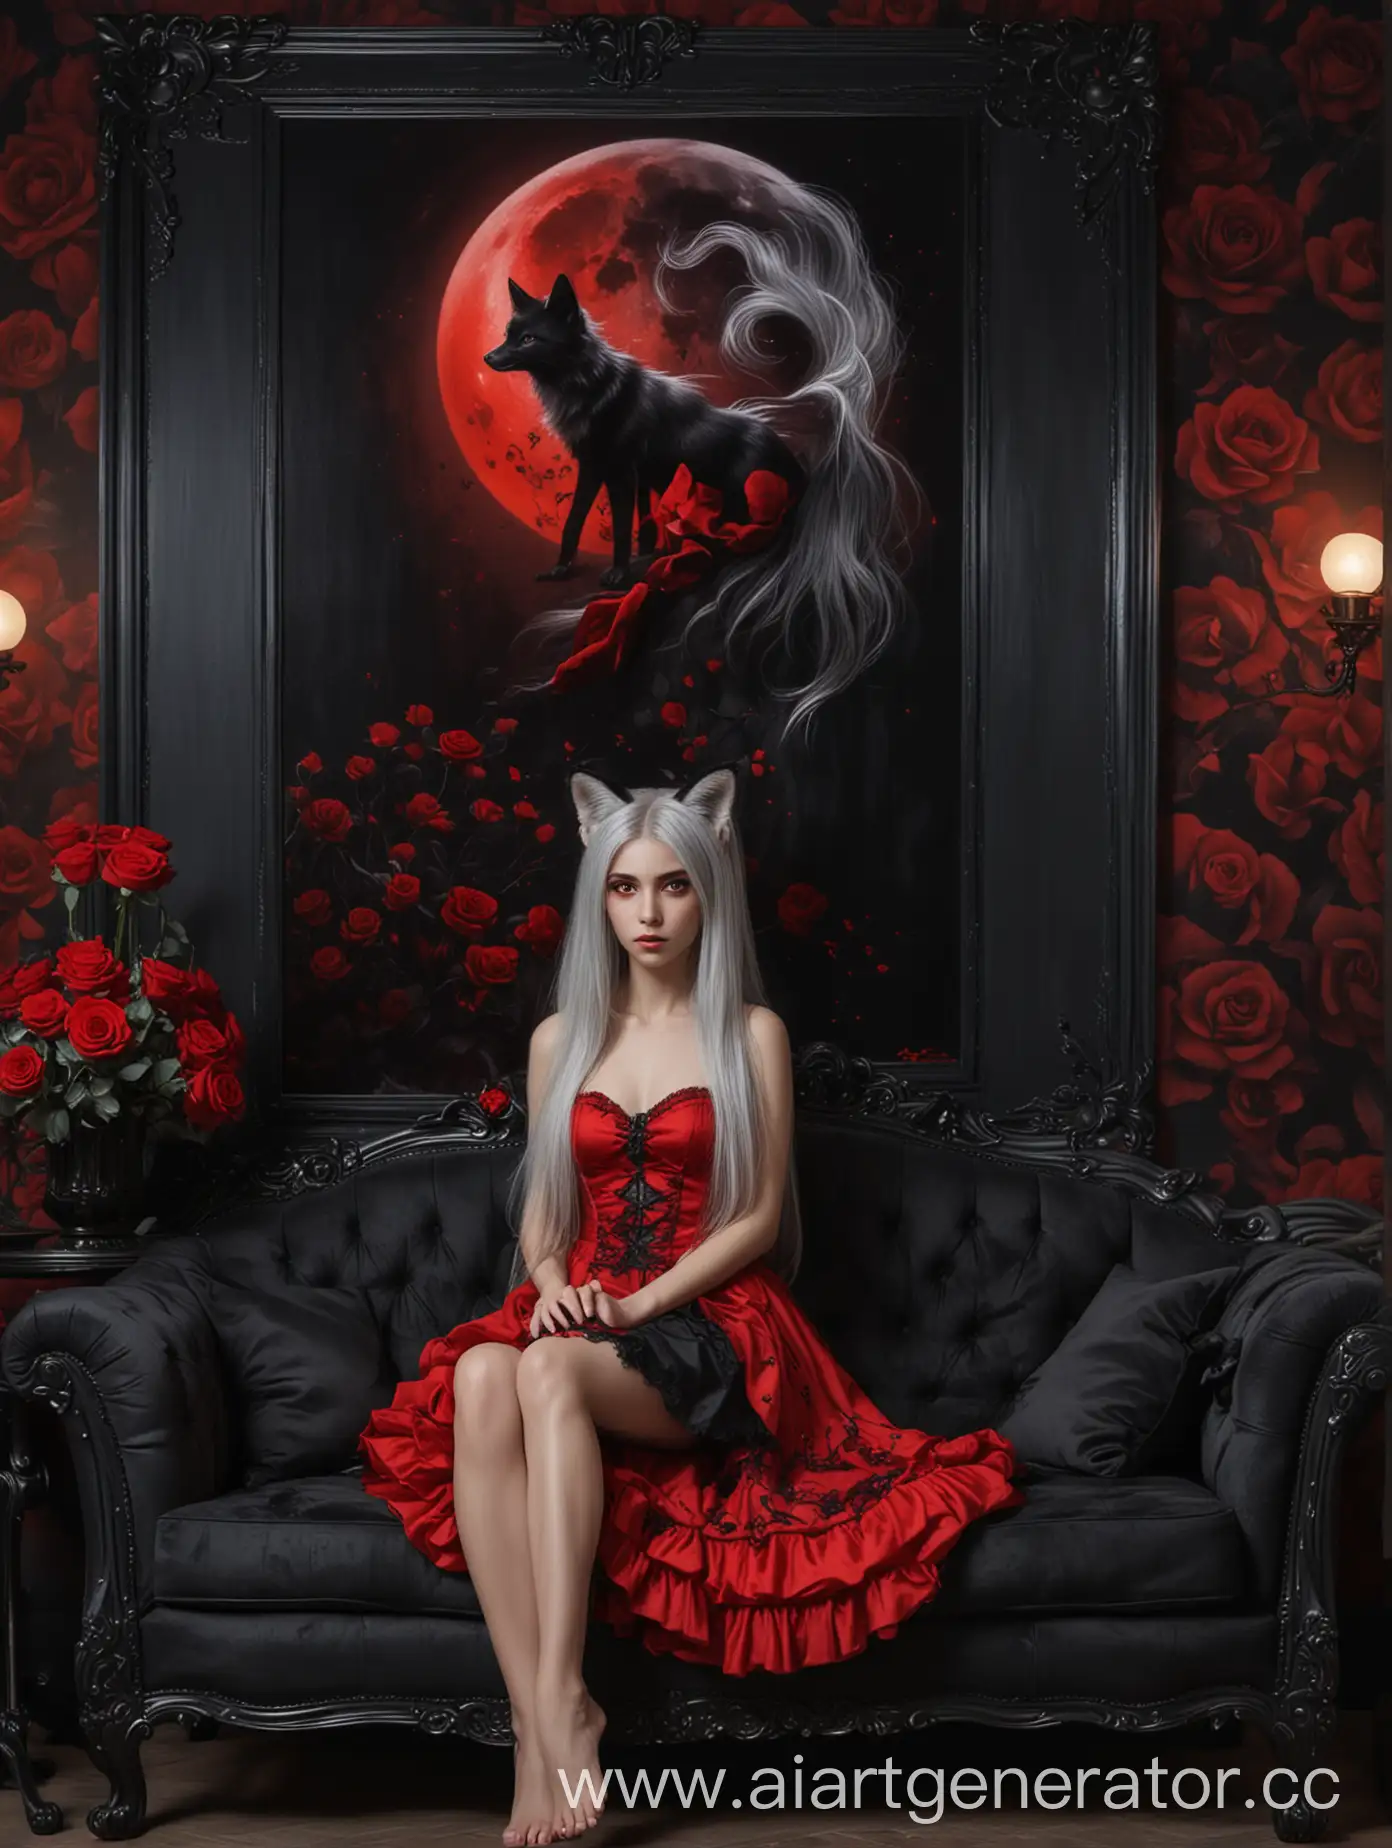 Mystical-Fox-Girl-with-Red-Eyes-in-Elegant-Black-and-Red-Dress